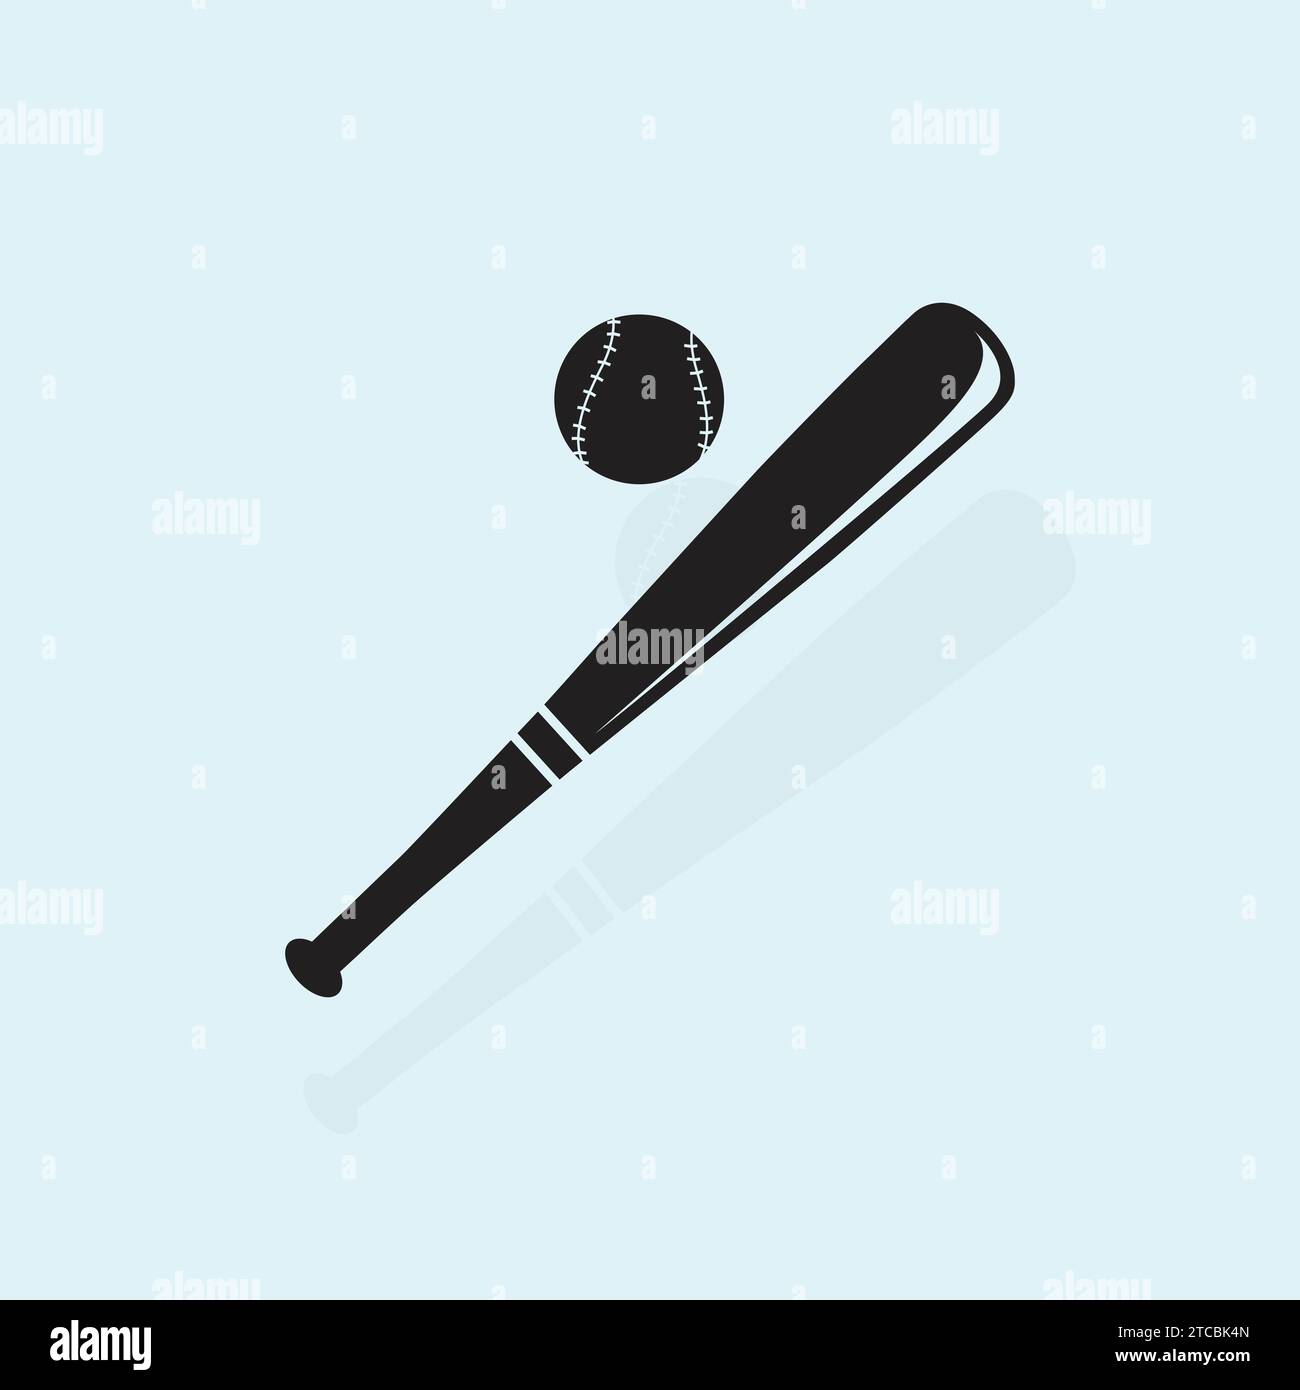 vector icons of baseball bats and balls crossed Stock Vector